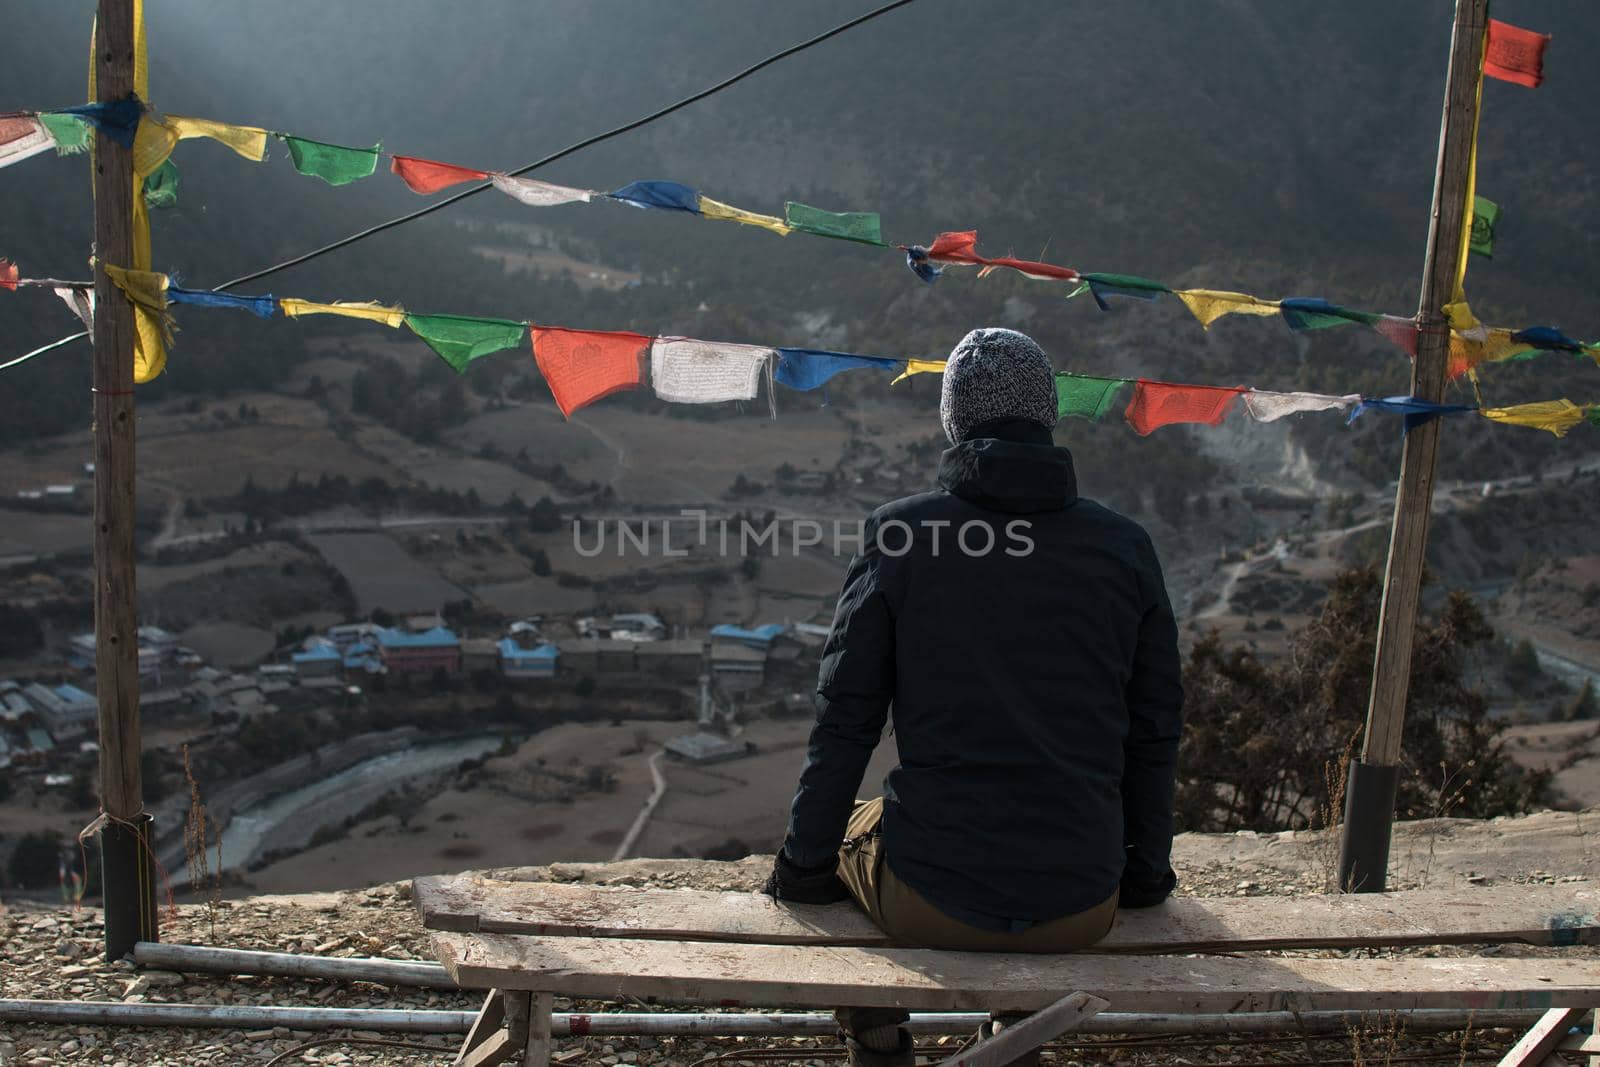 Young man looking over Lower Pisang mountain village by arvidnorberg